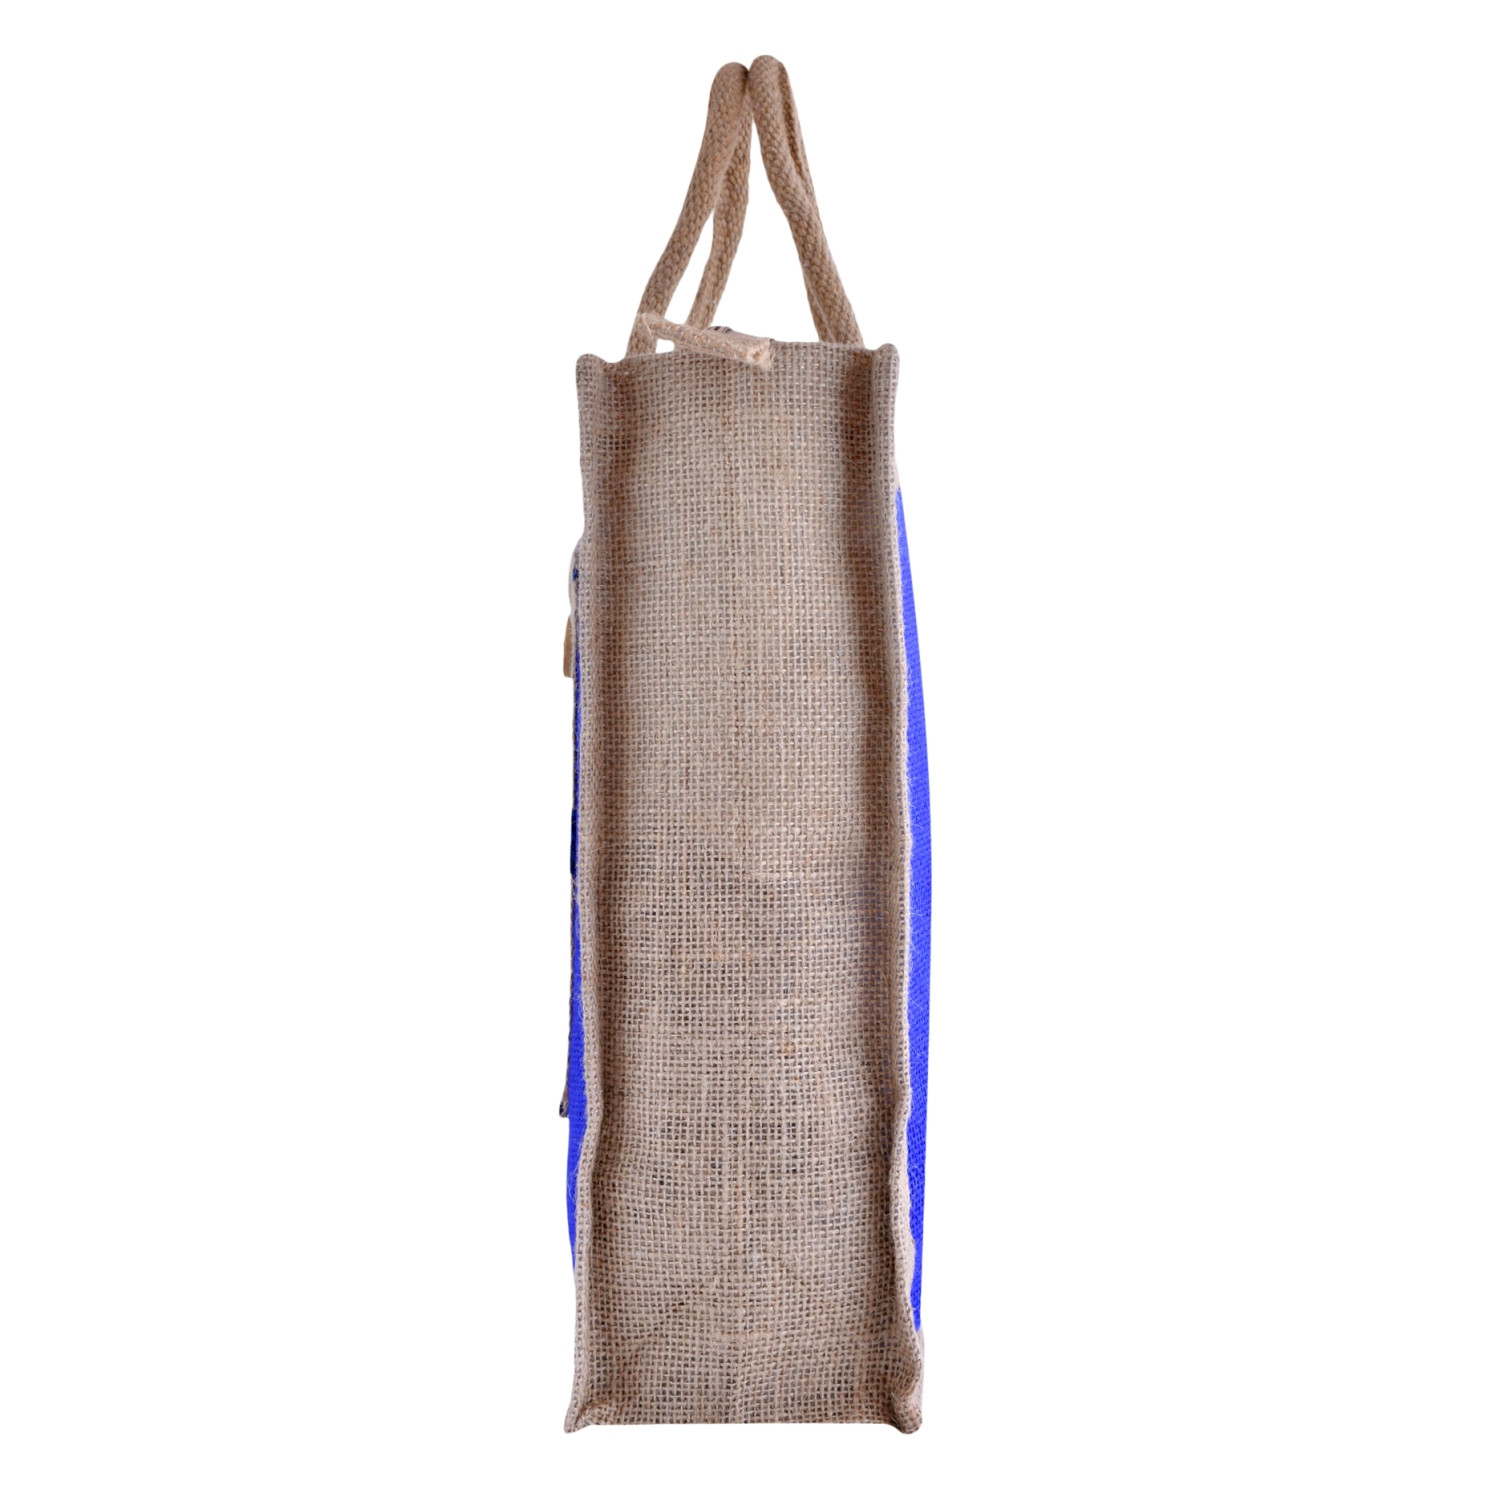 Kuber Industries Grocery Bag | Jute Carry Bag | Lunch Bags for Office | Zipper Grocery Bag with Handle | Vegetable Bag | Blue Flower Shopping Bag | Medium | Brown